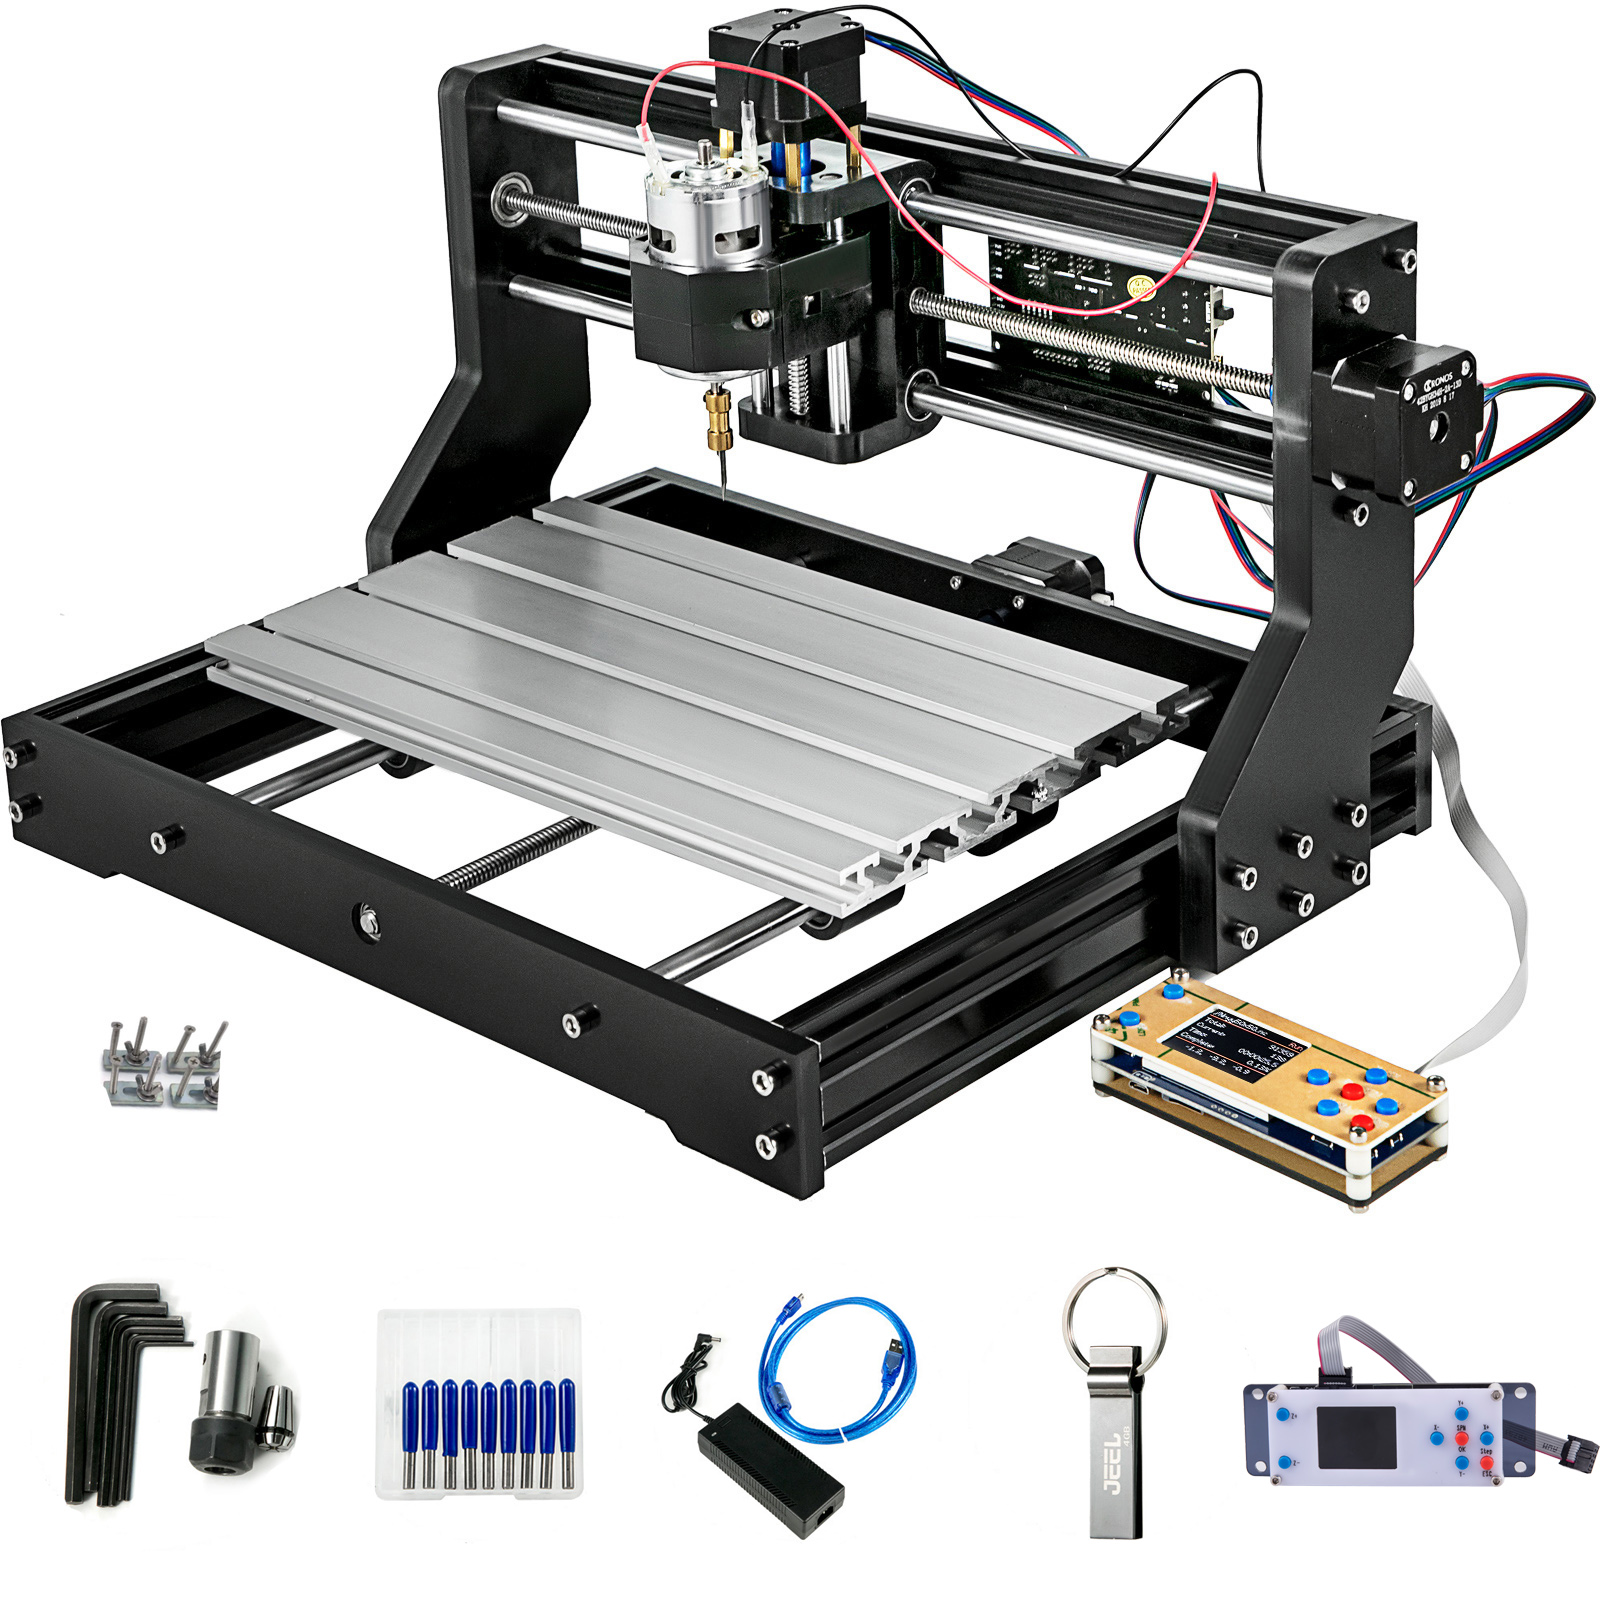 VEVOR CNC 3018-PRO Axis CNC Router Kit GRBL Control with Offline  Controller Plastic Acrylic PCB PVC Wood Carving Milling Engraving Machine  XYZ Working Area 300x180x45mm